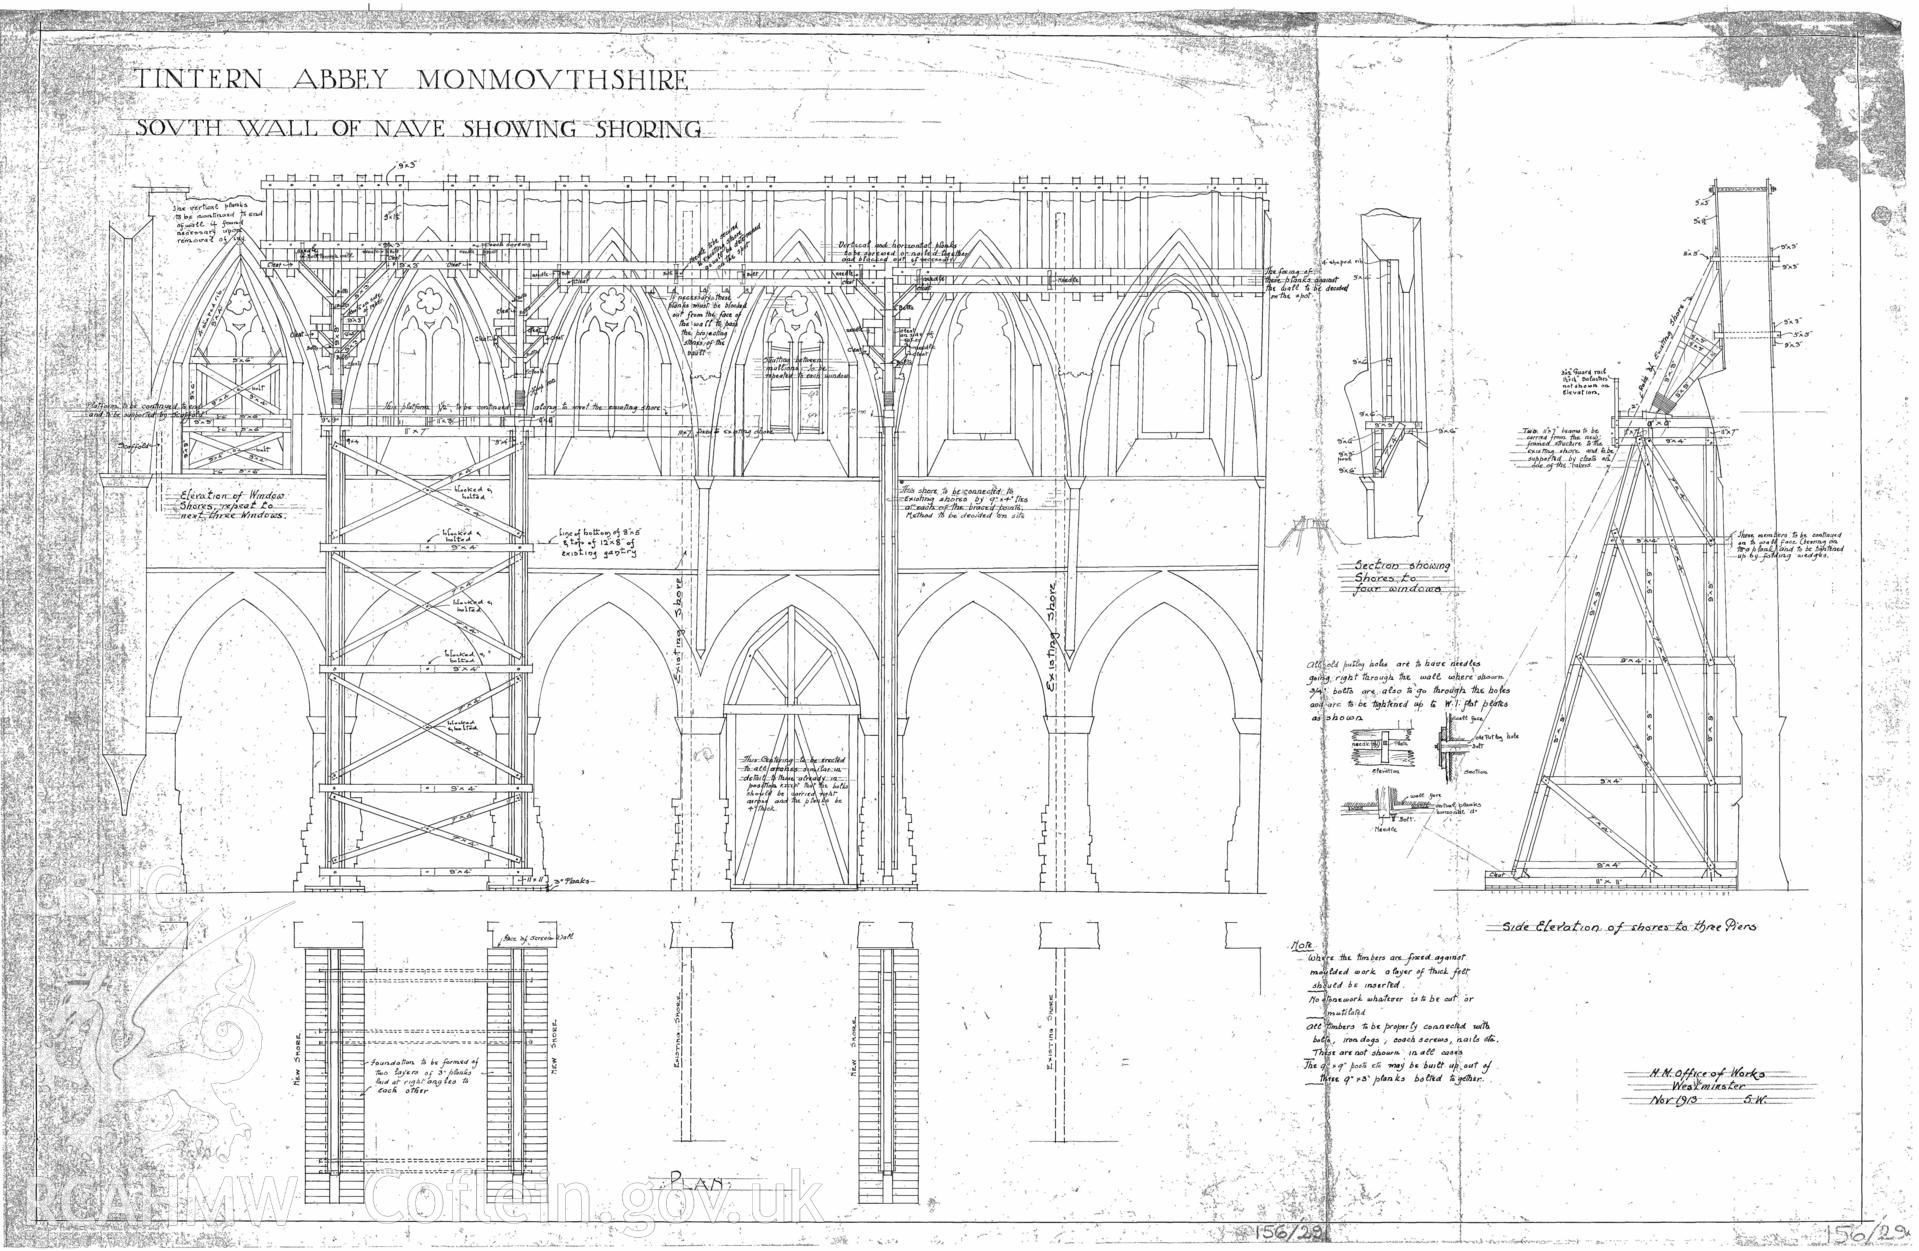 Cadw guardianship monument drawing of Tintern Abbey. S wall of Nave showing shoring. Cadw ref. No. 156/29b. Various scales.